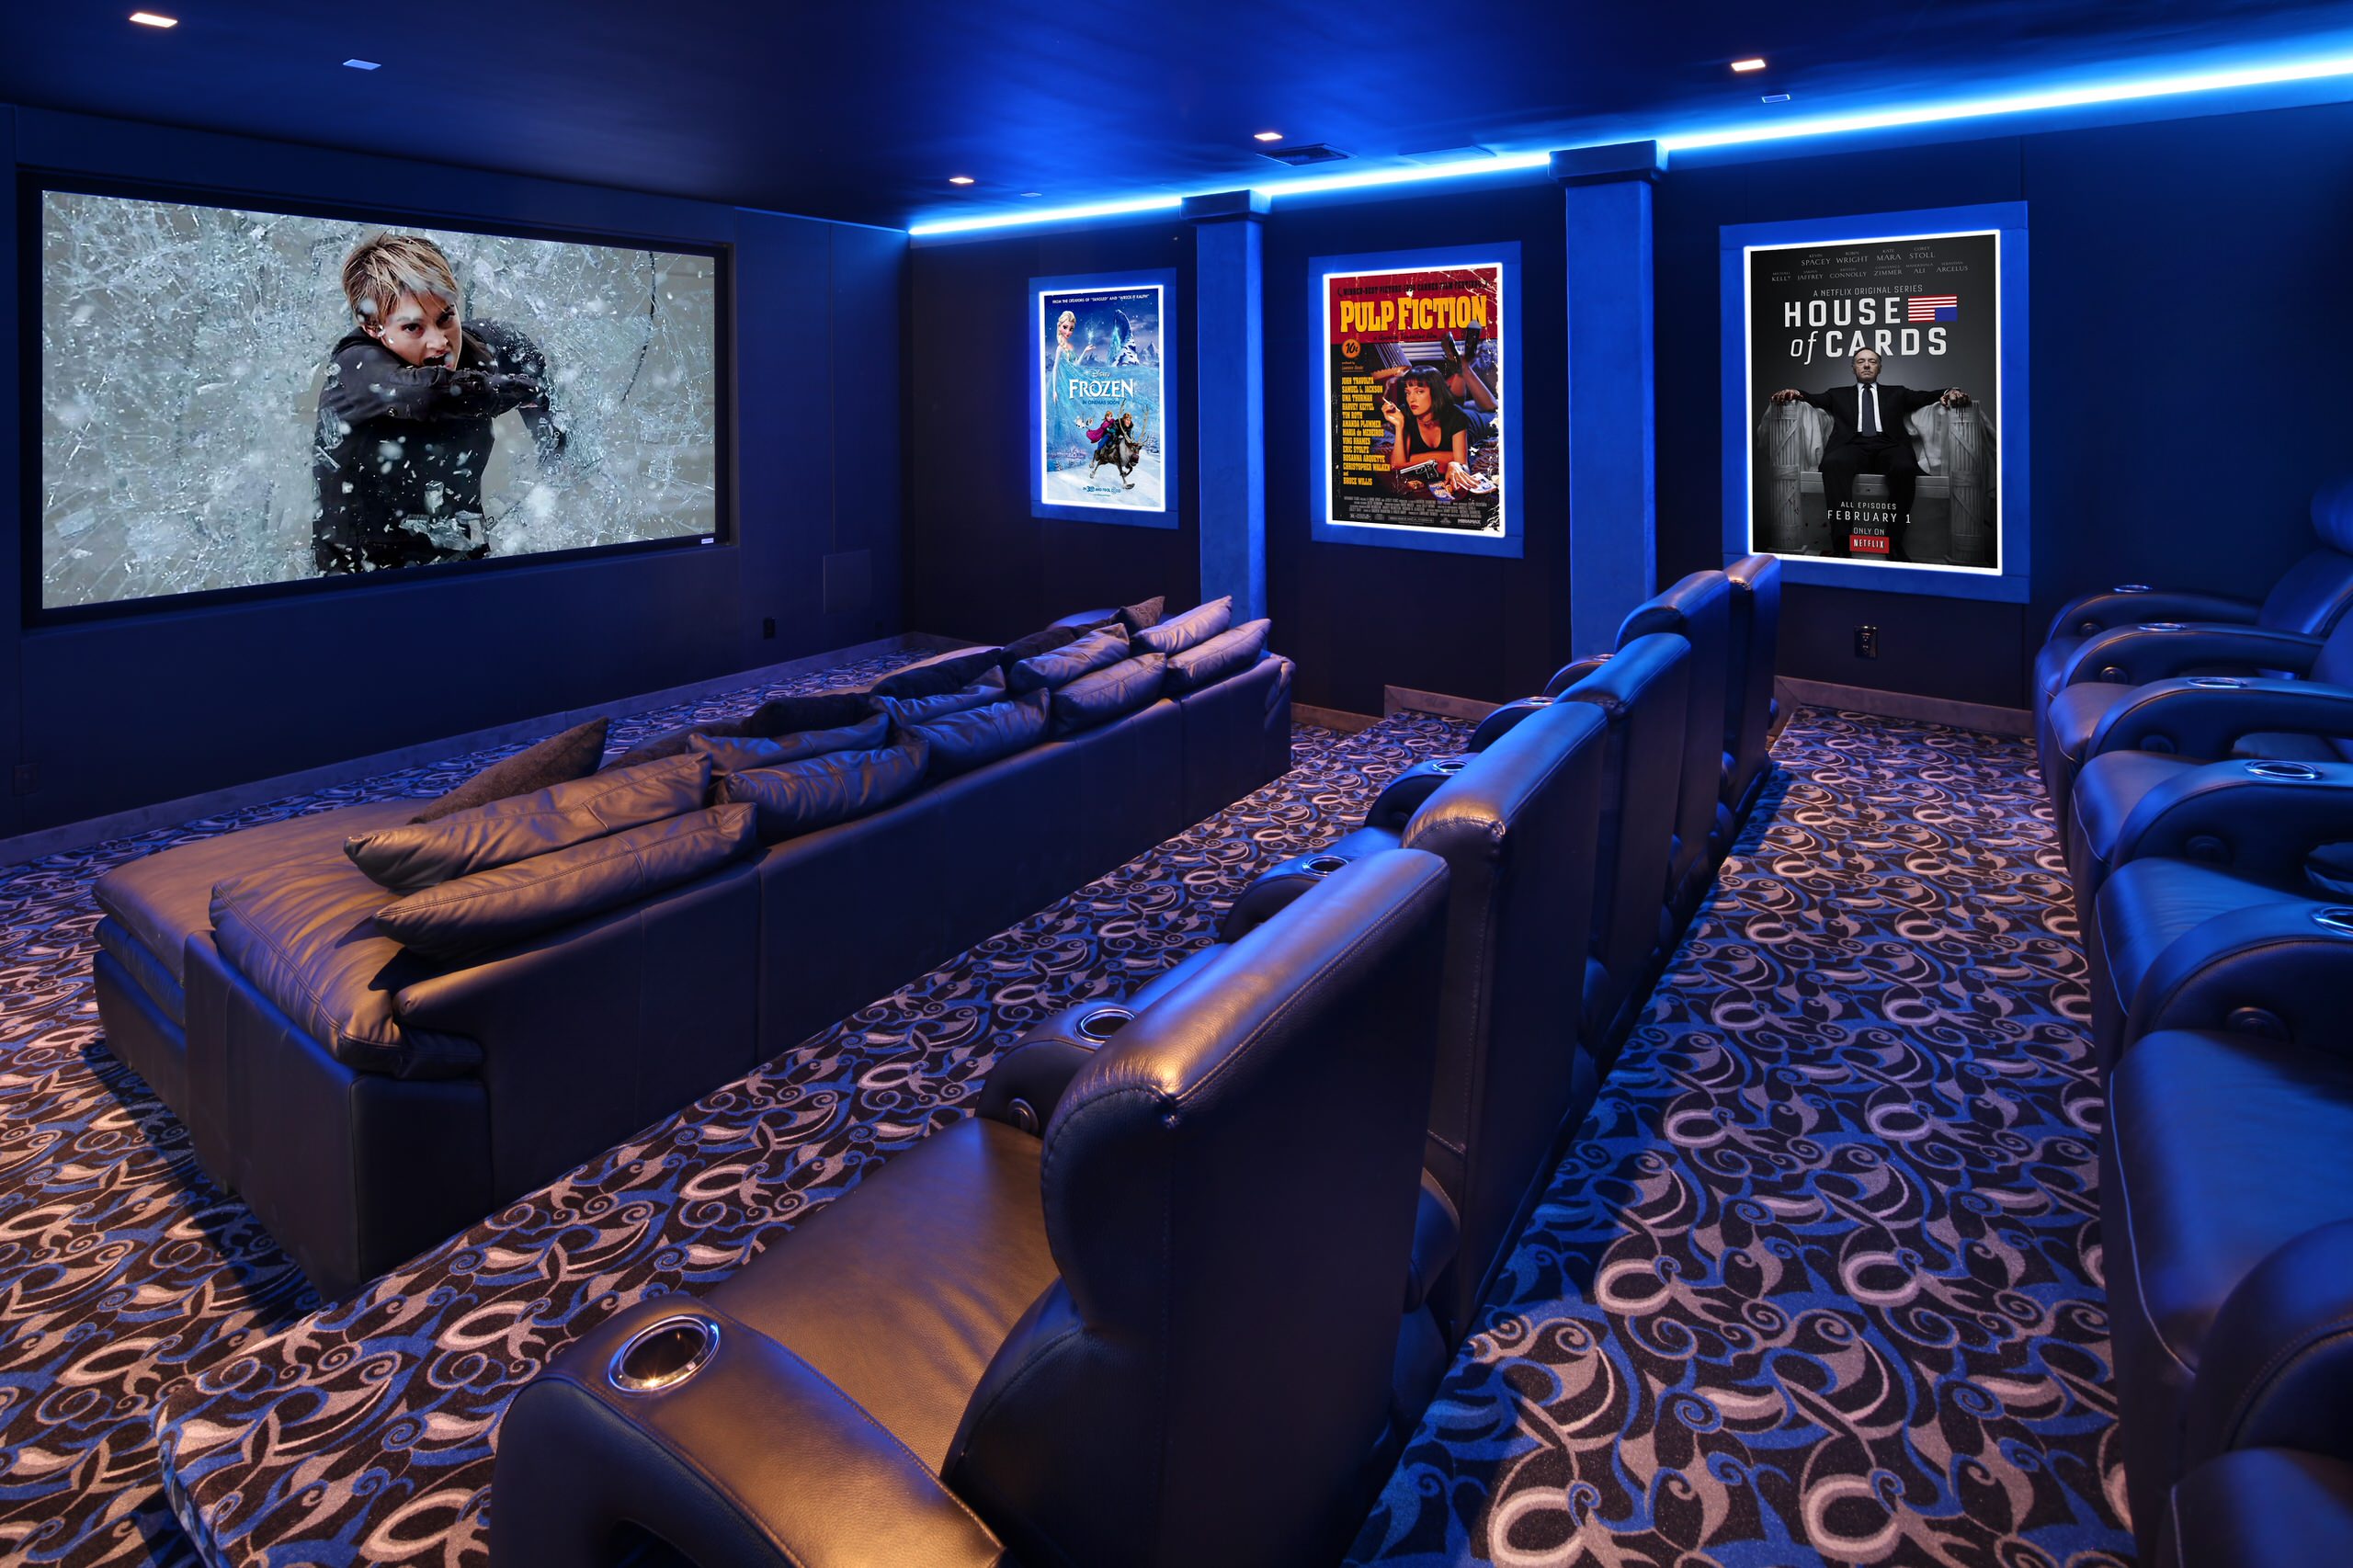 Home Cinema - Contemporary - Home Theater - Berkshire - by Adept Integrated  Systems Ltd